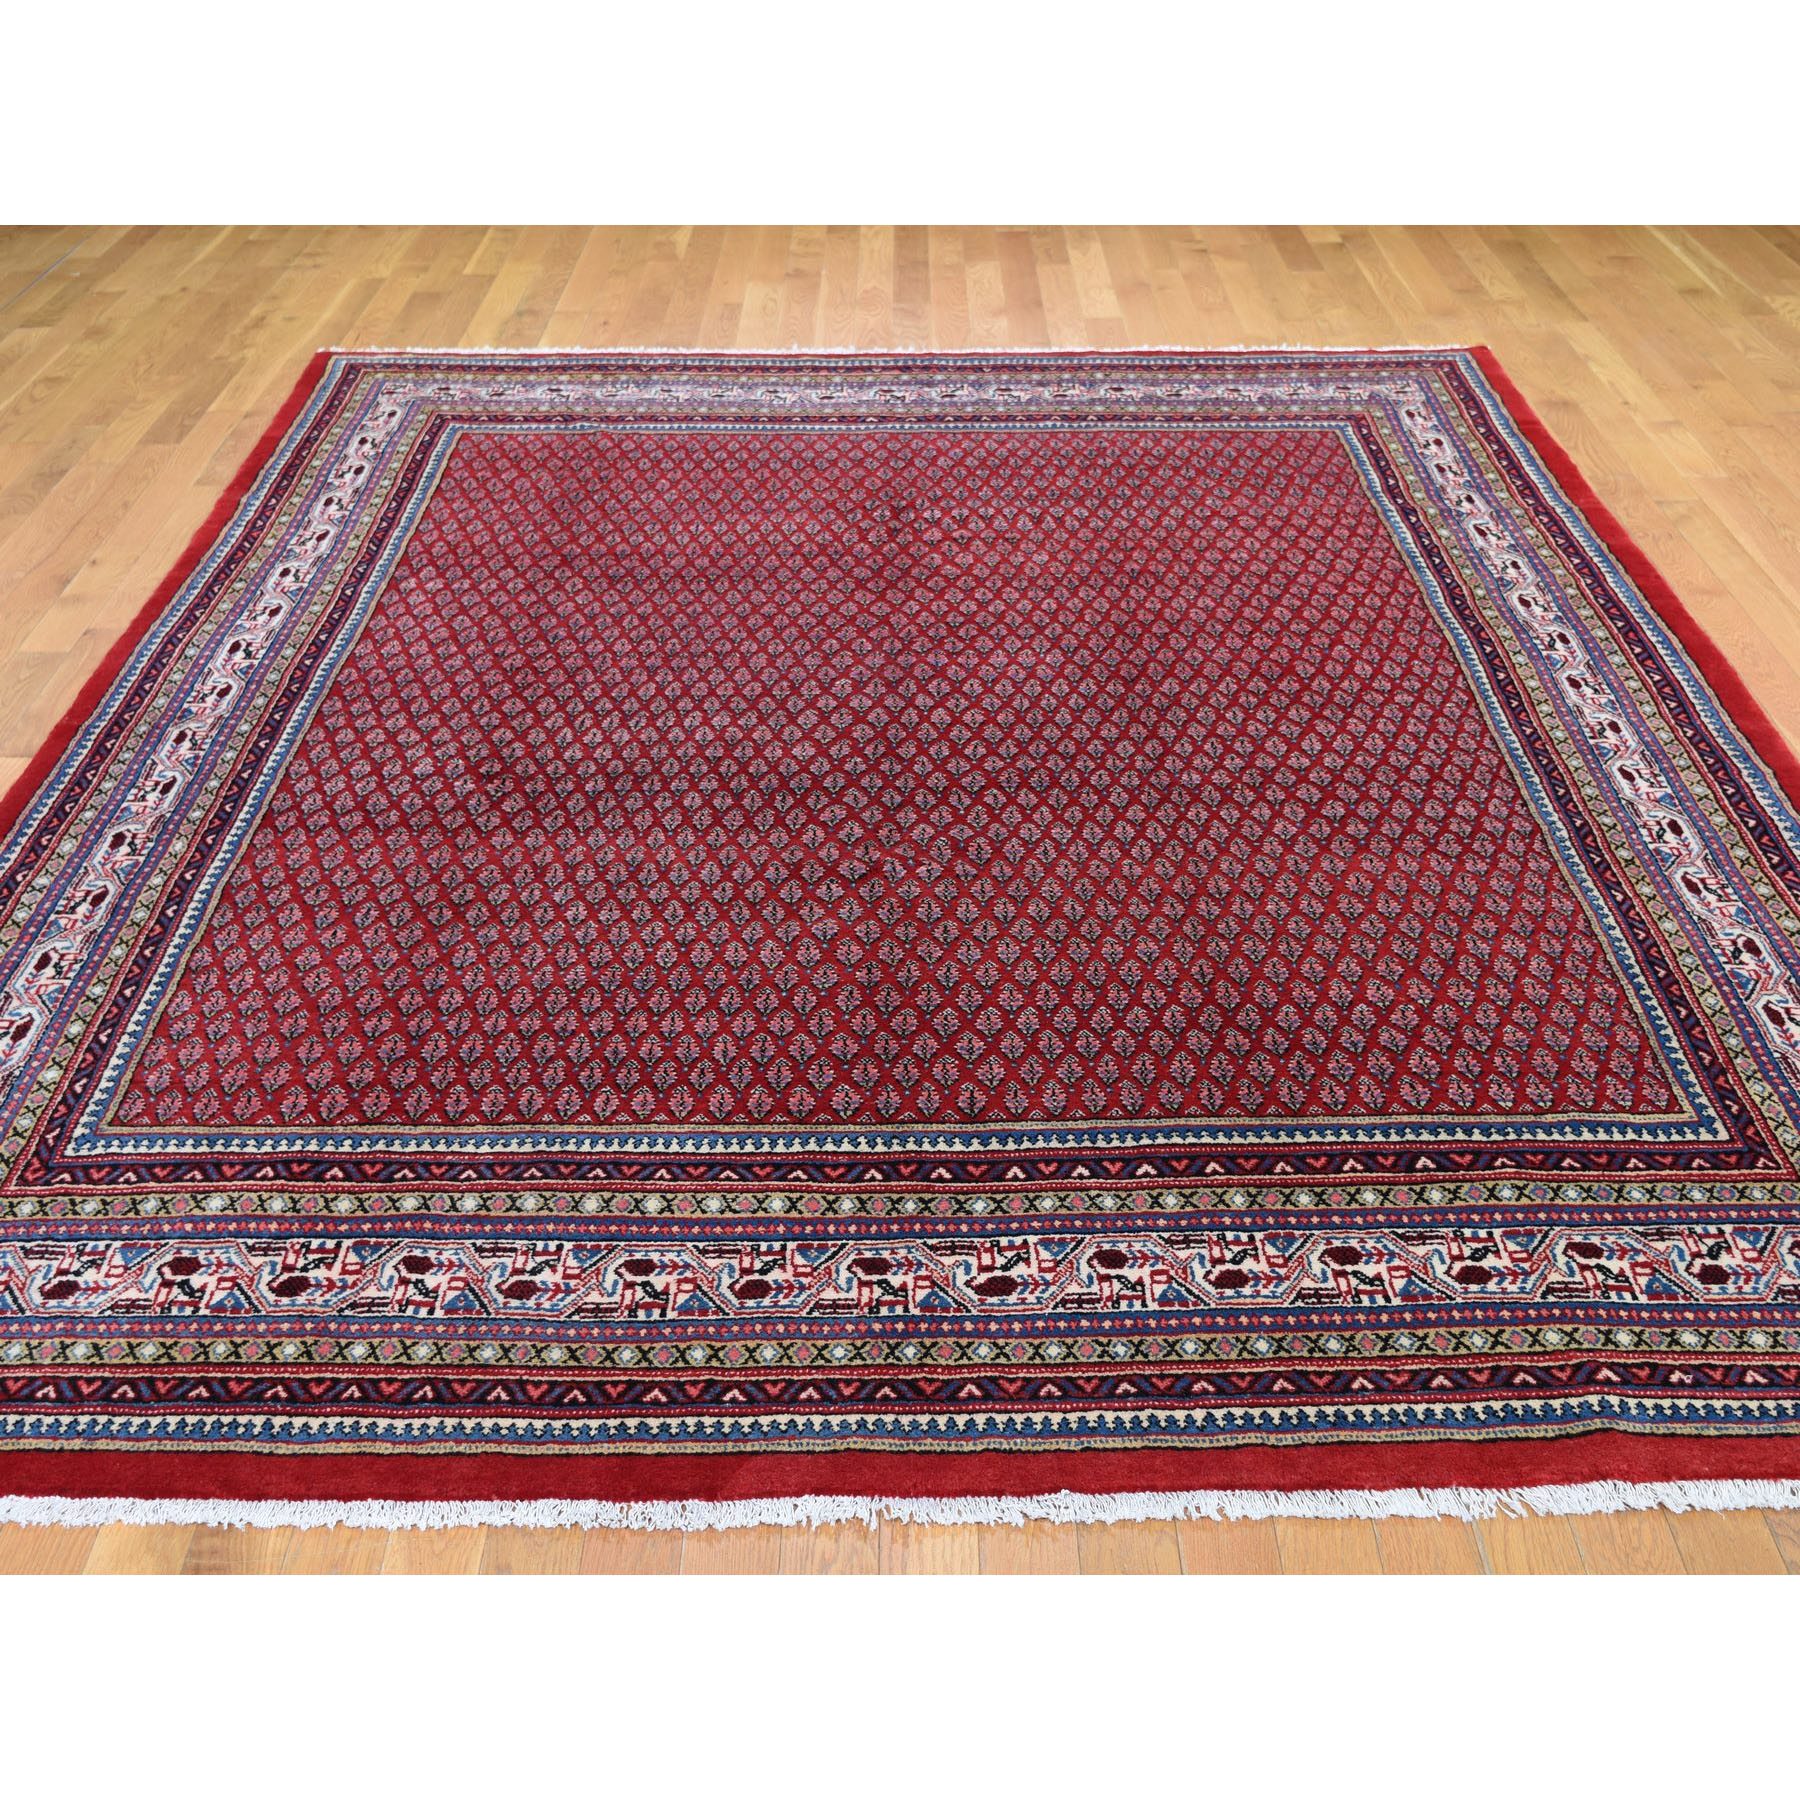 7-10 x11-2  Red New Persian Sarouk Mir With Repetitive Design Pure Wool Oriental Rug 